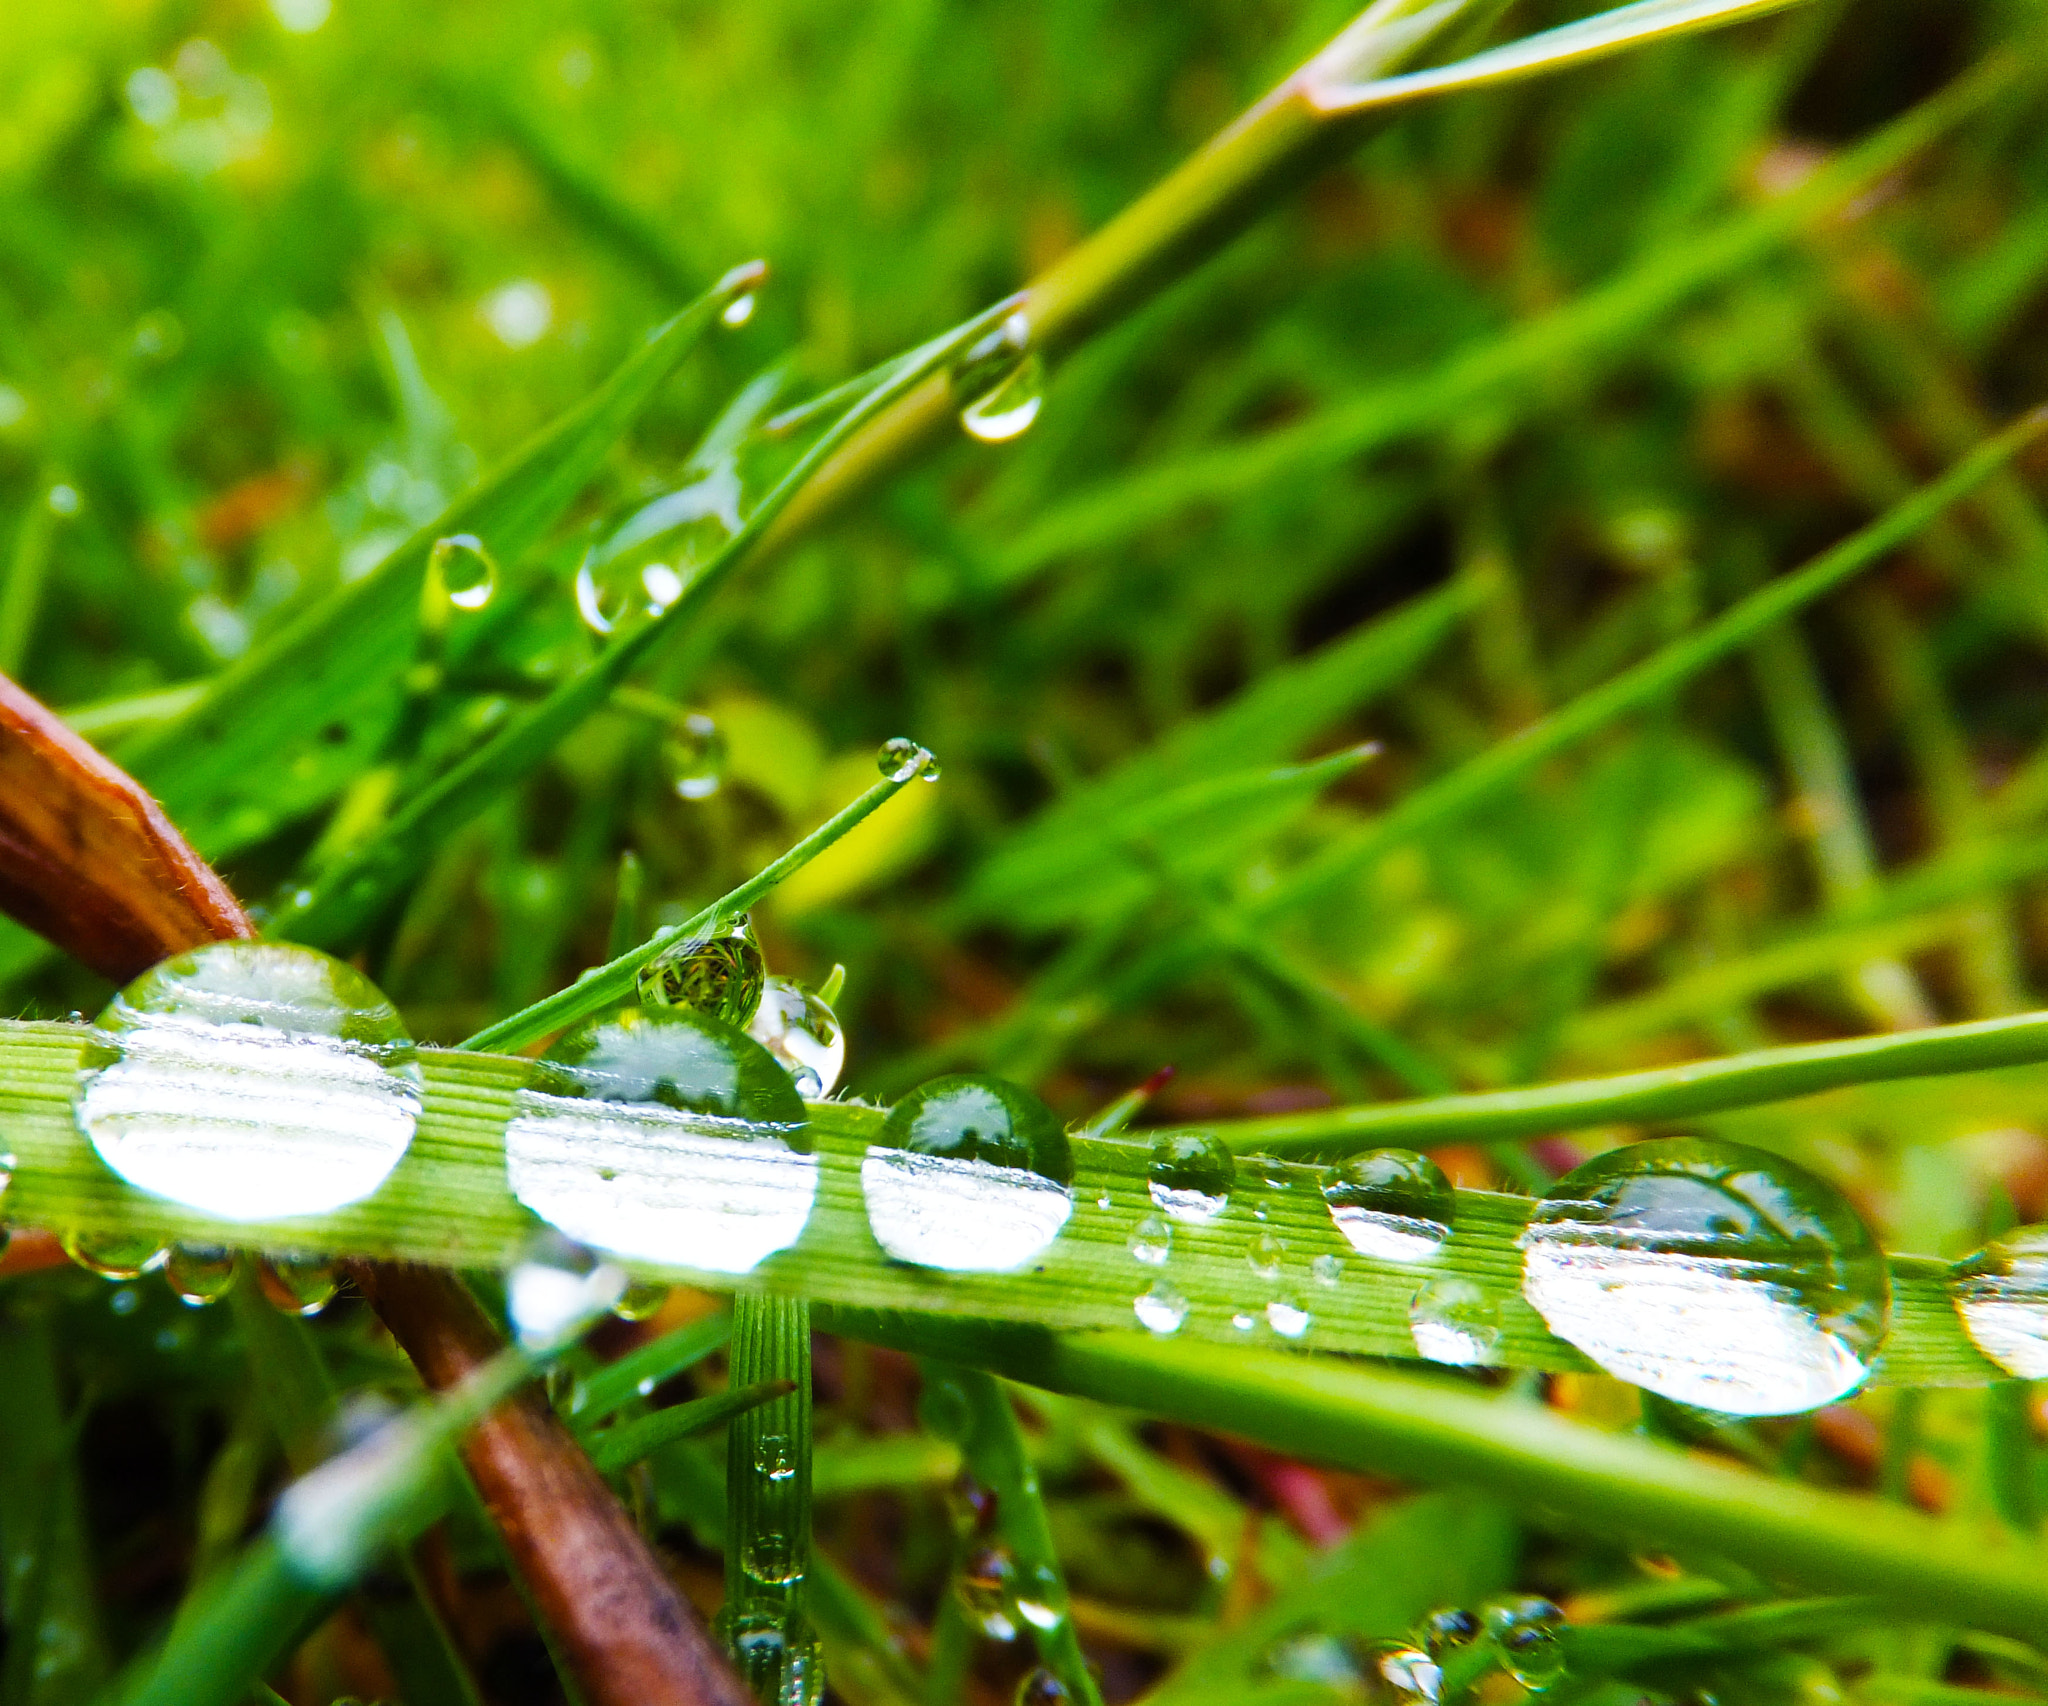 Fujifilm FinePix F600 EXR sample photo. Water droplets on a blade of grass photography